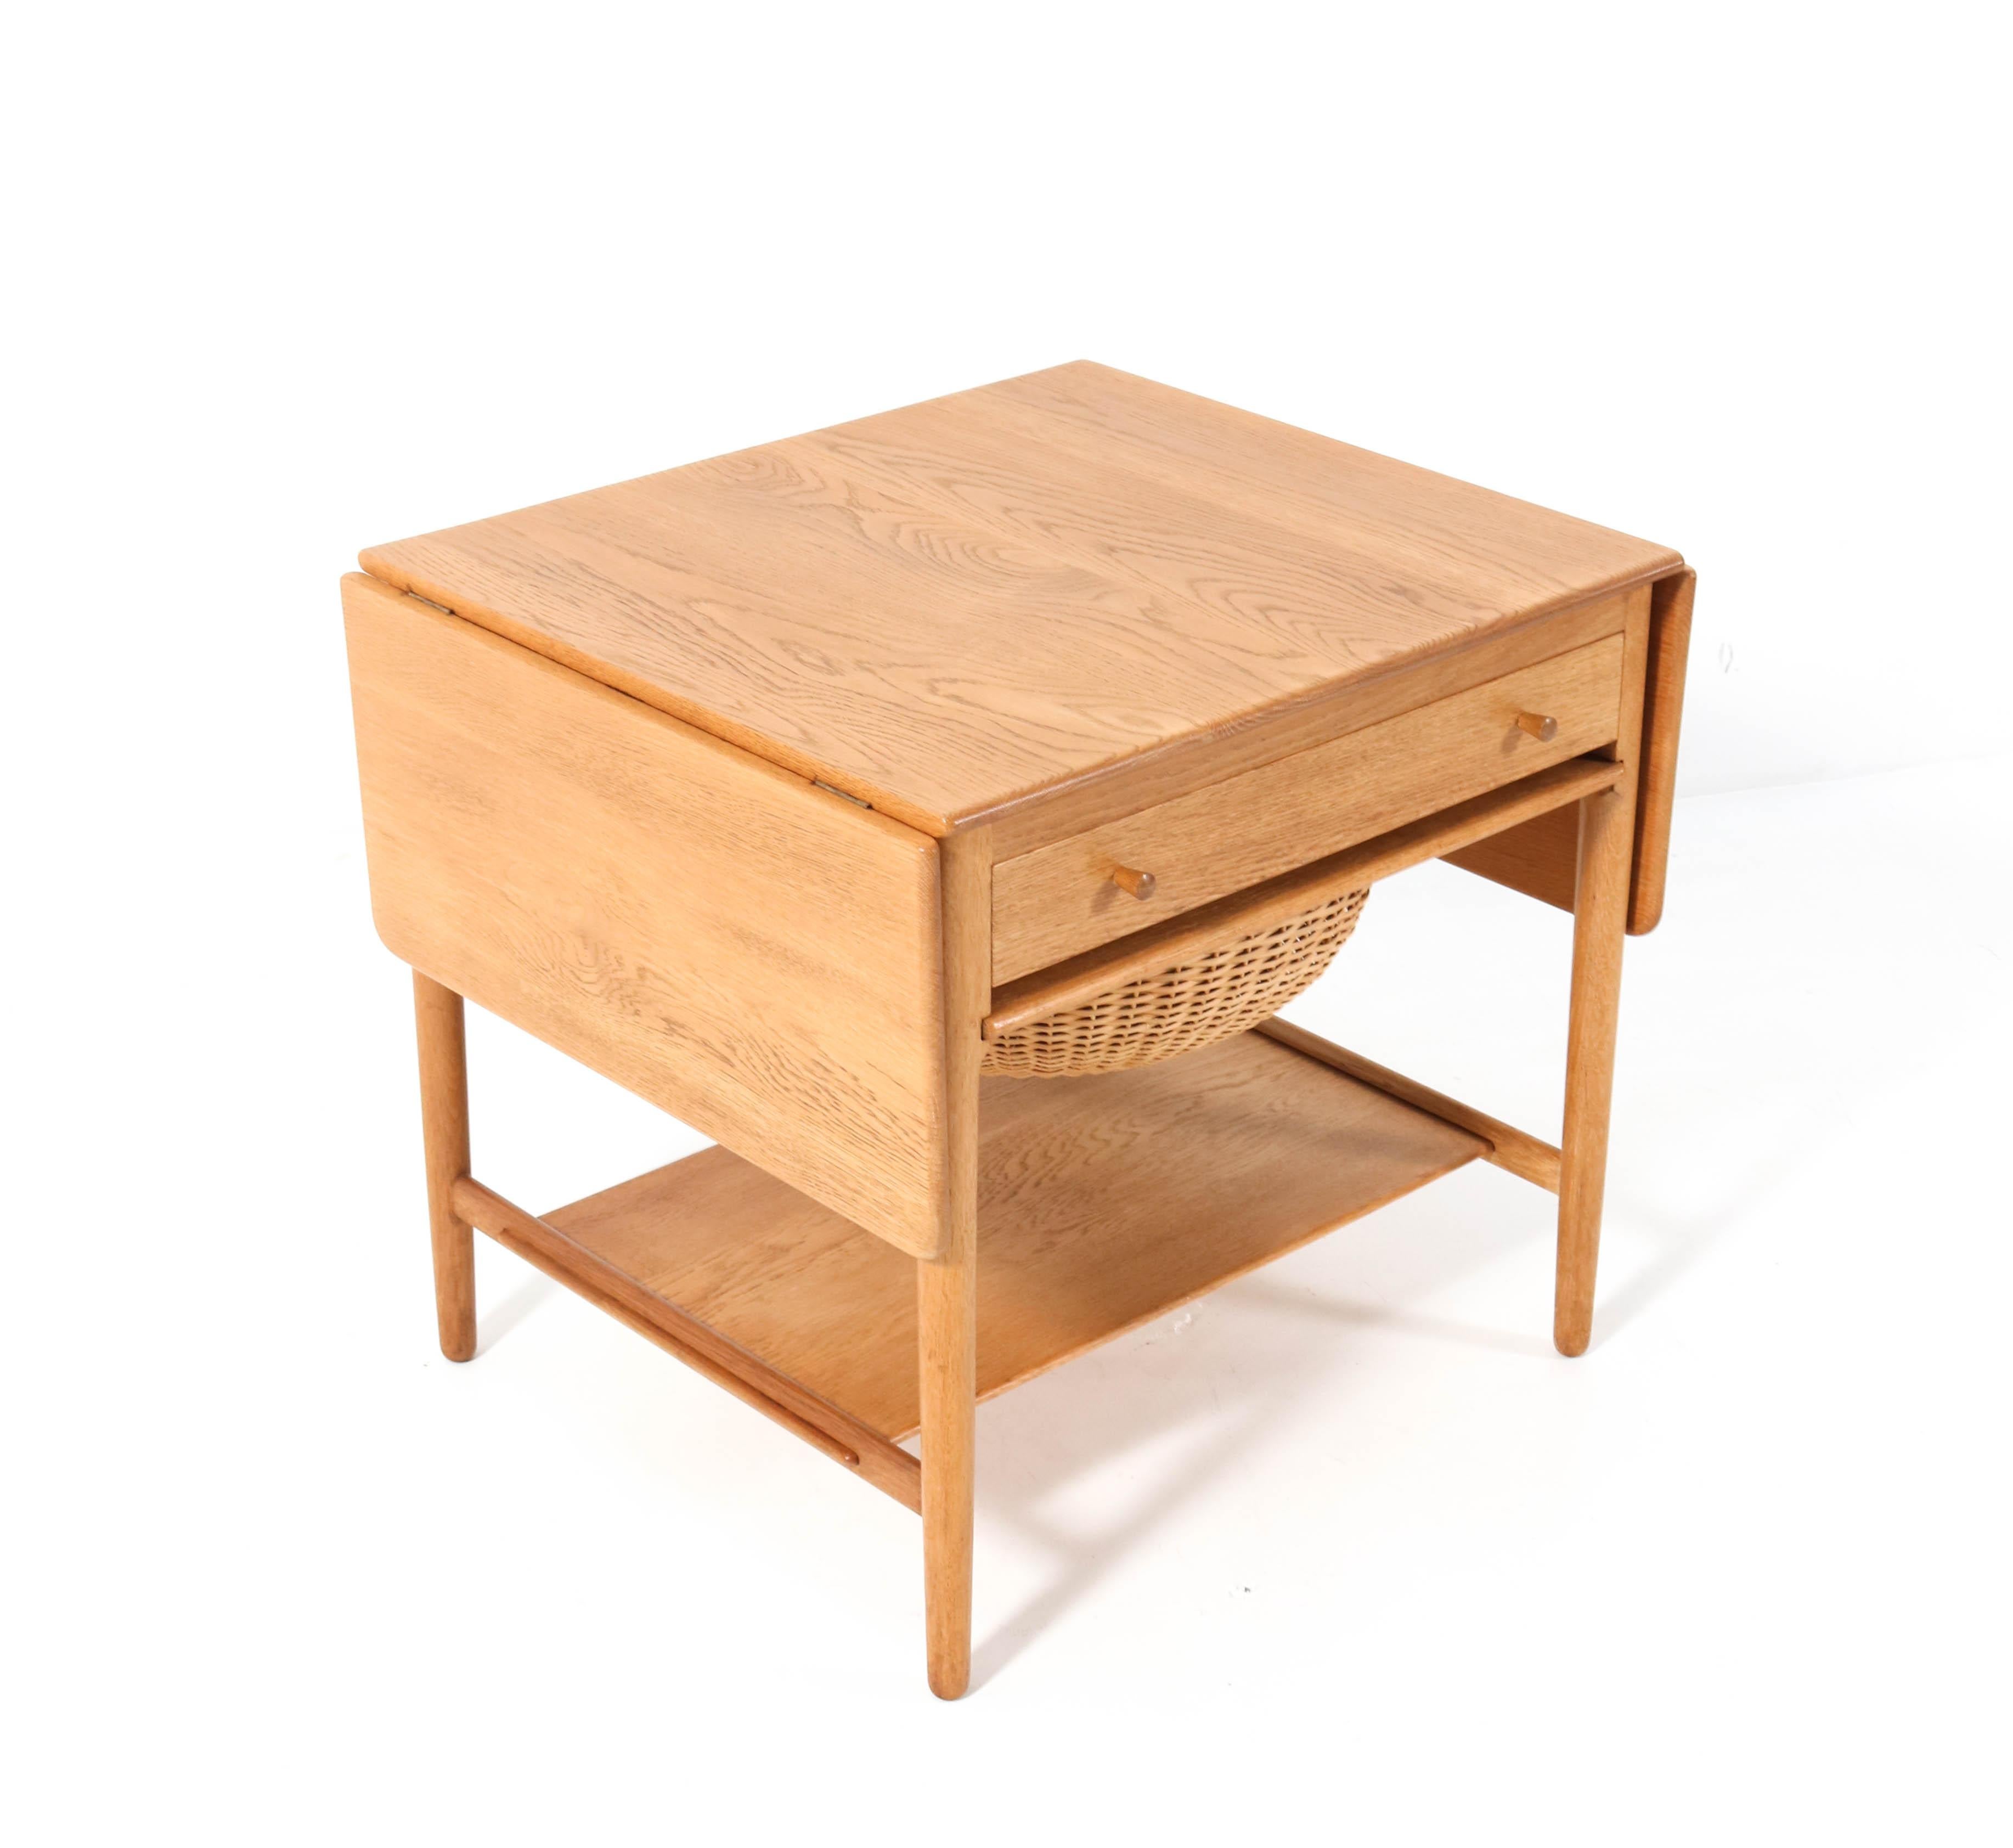 Danish Mid-Century Modern AT-33 Sewing Table by Hans J. Wegner for Andreas Tuck, 1950s